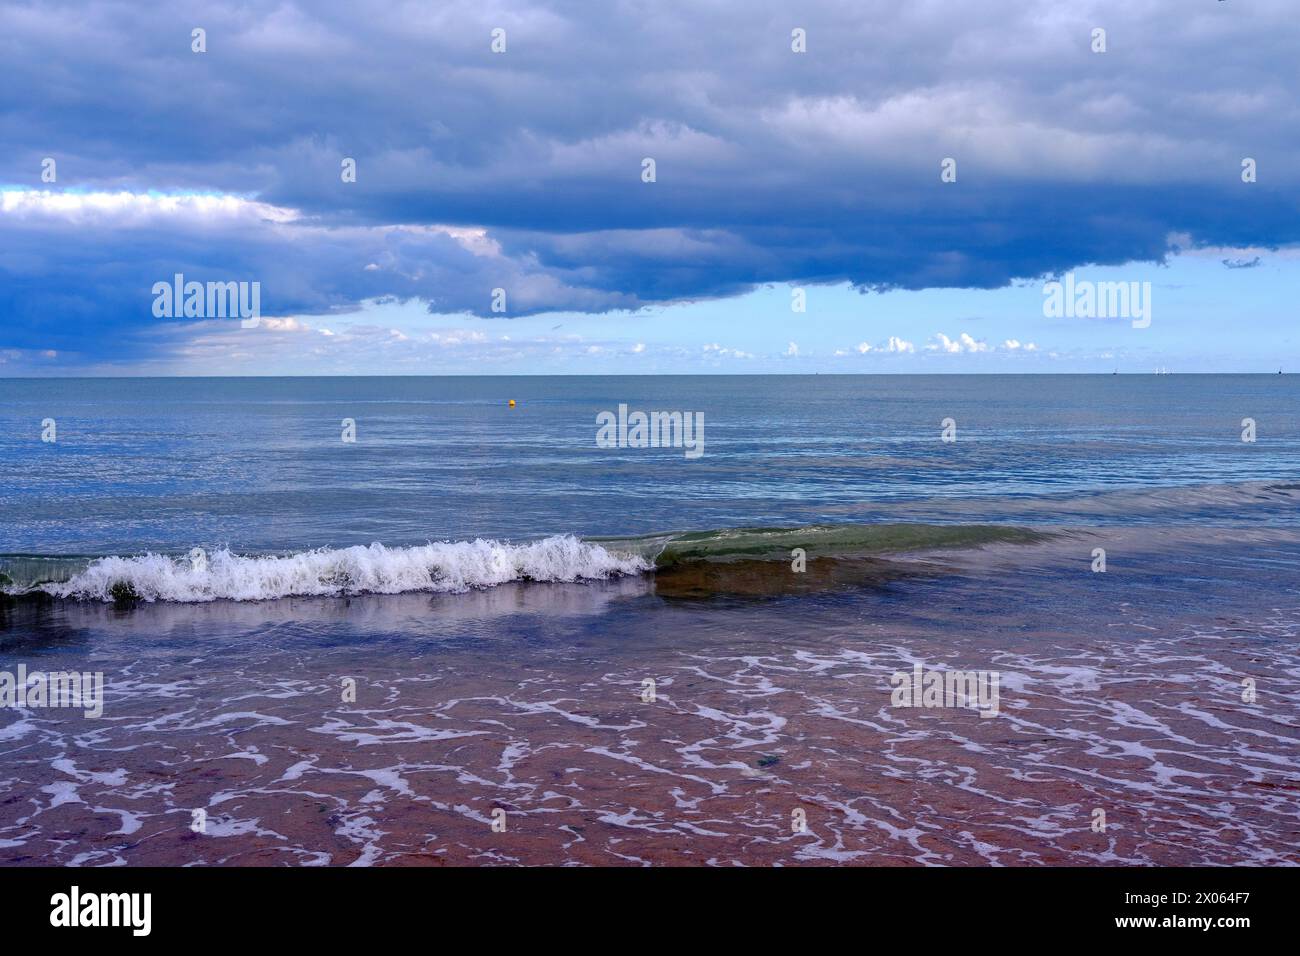 Tranquil beach with calm sea under dark, stormy clouds. Deep blue water, gently lapping the sandy shore. Stock Photo